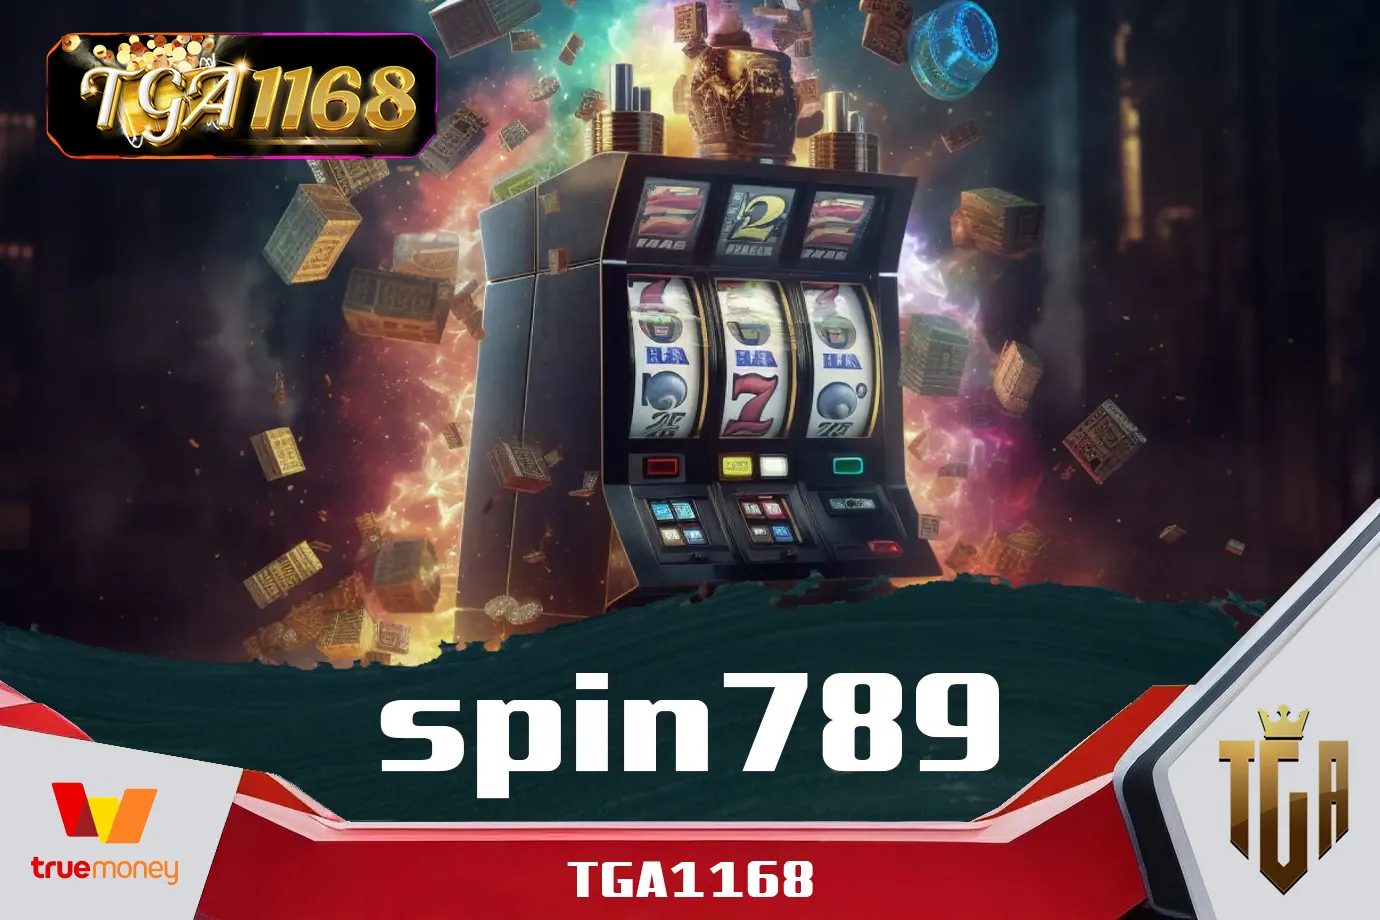 spin789